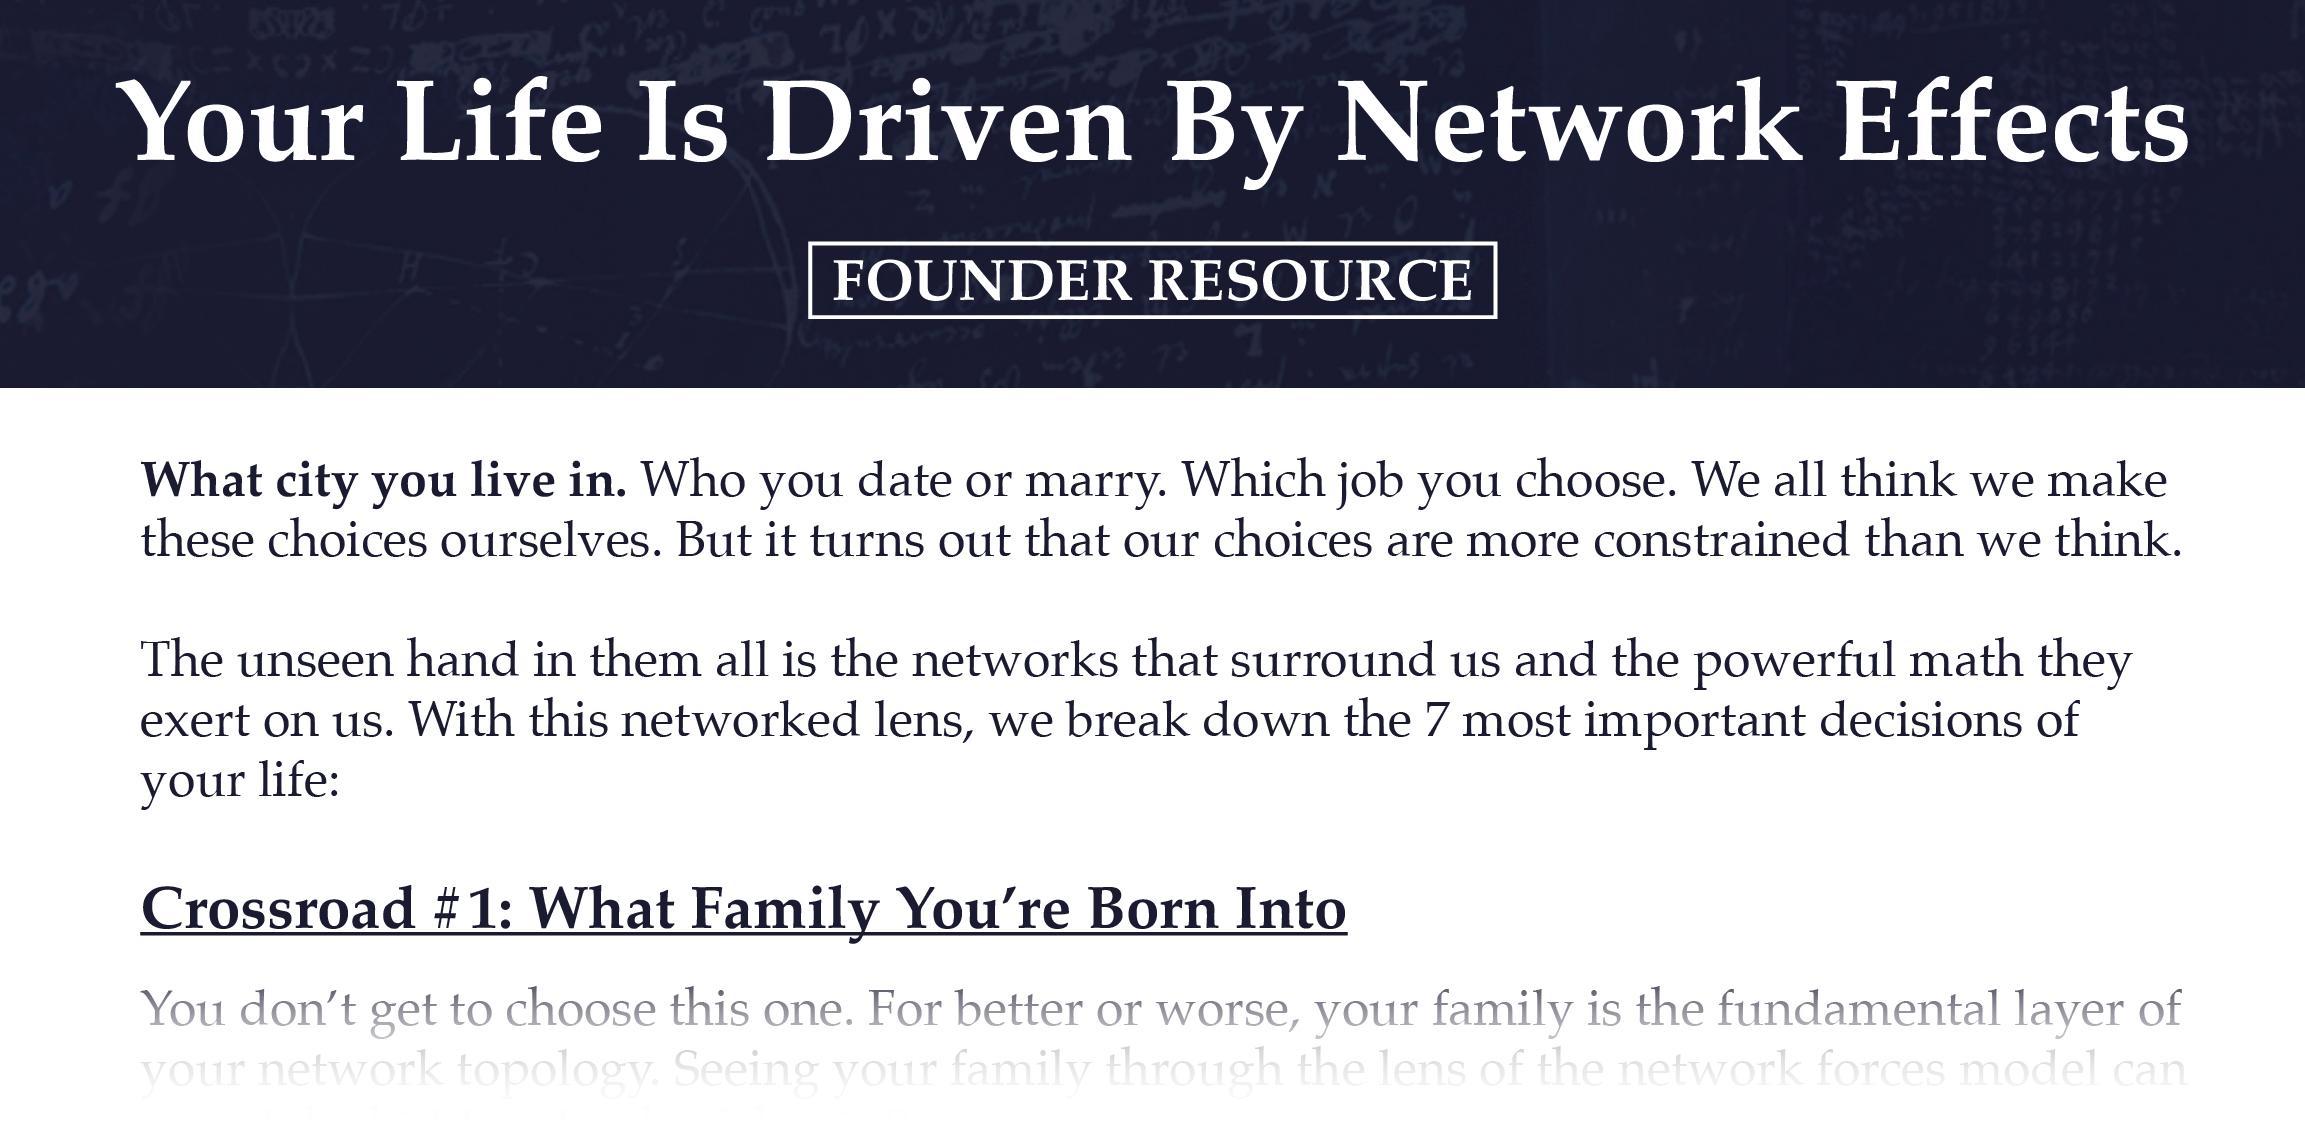 Your Life is Driven by Network Effects